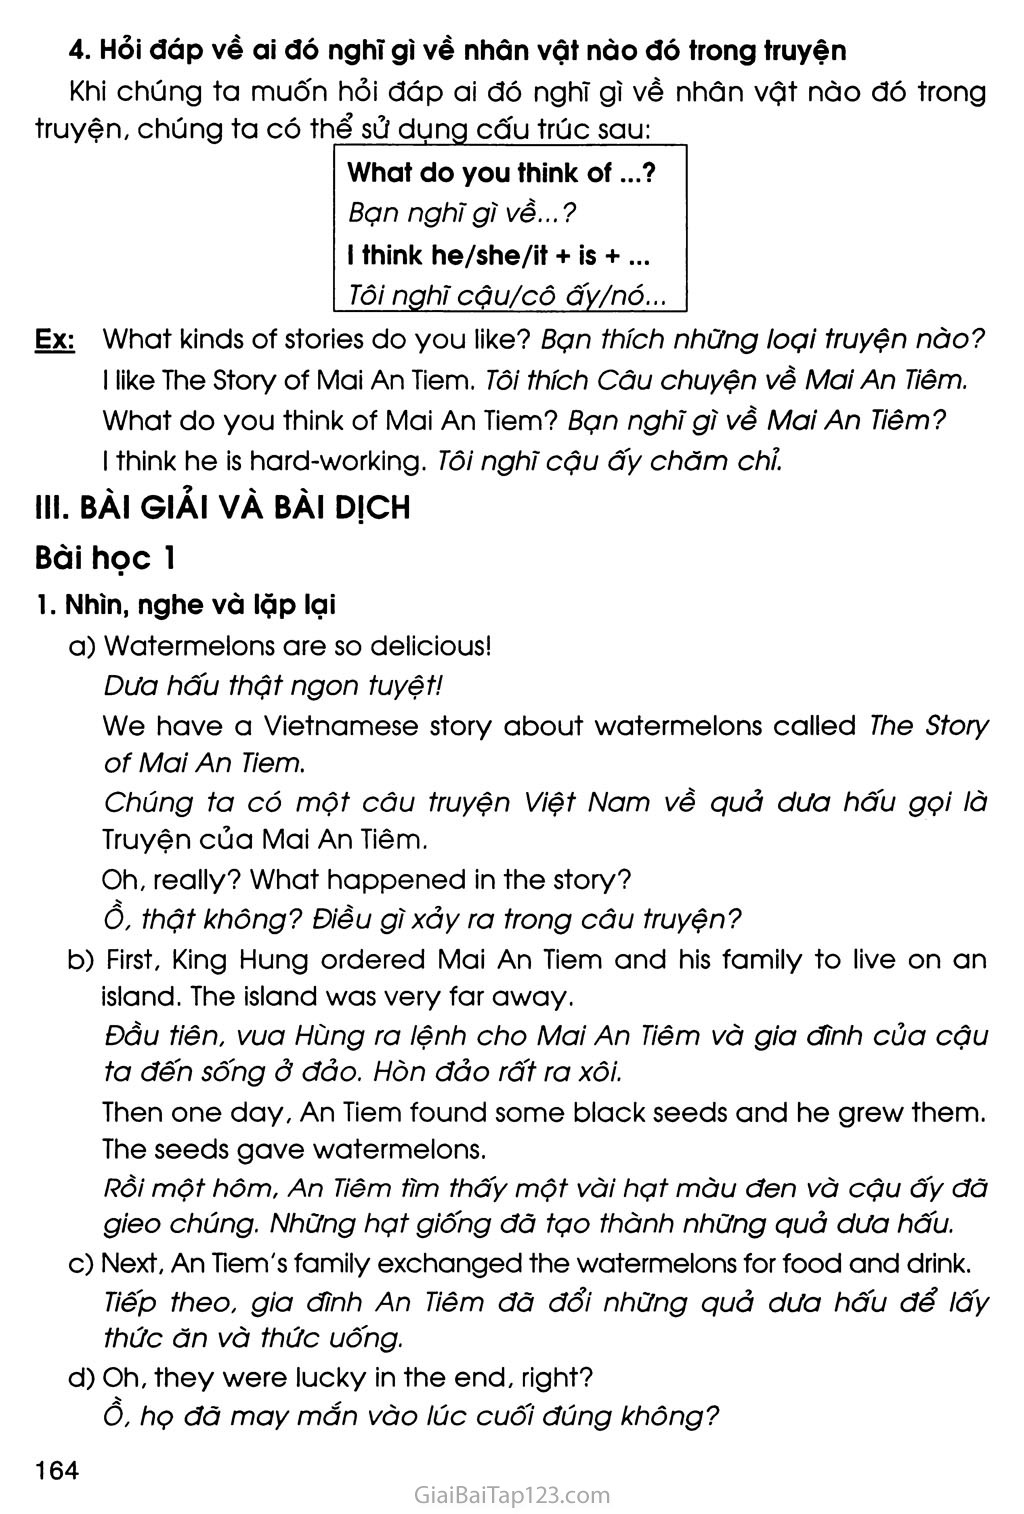 UNIT 14: WHAT HAPPENED IN THE STORY? trang 4